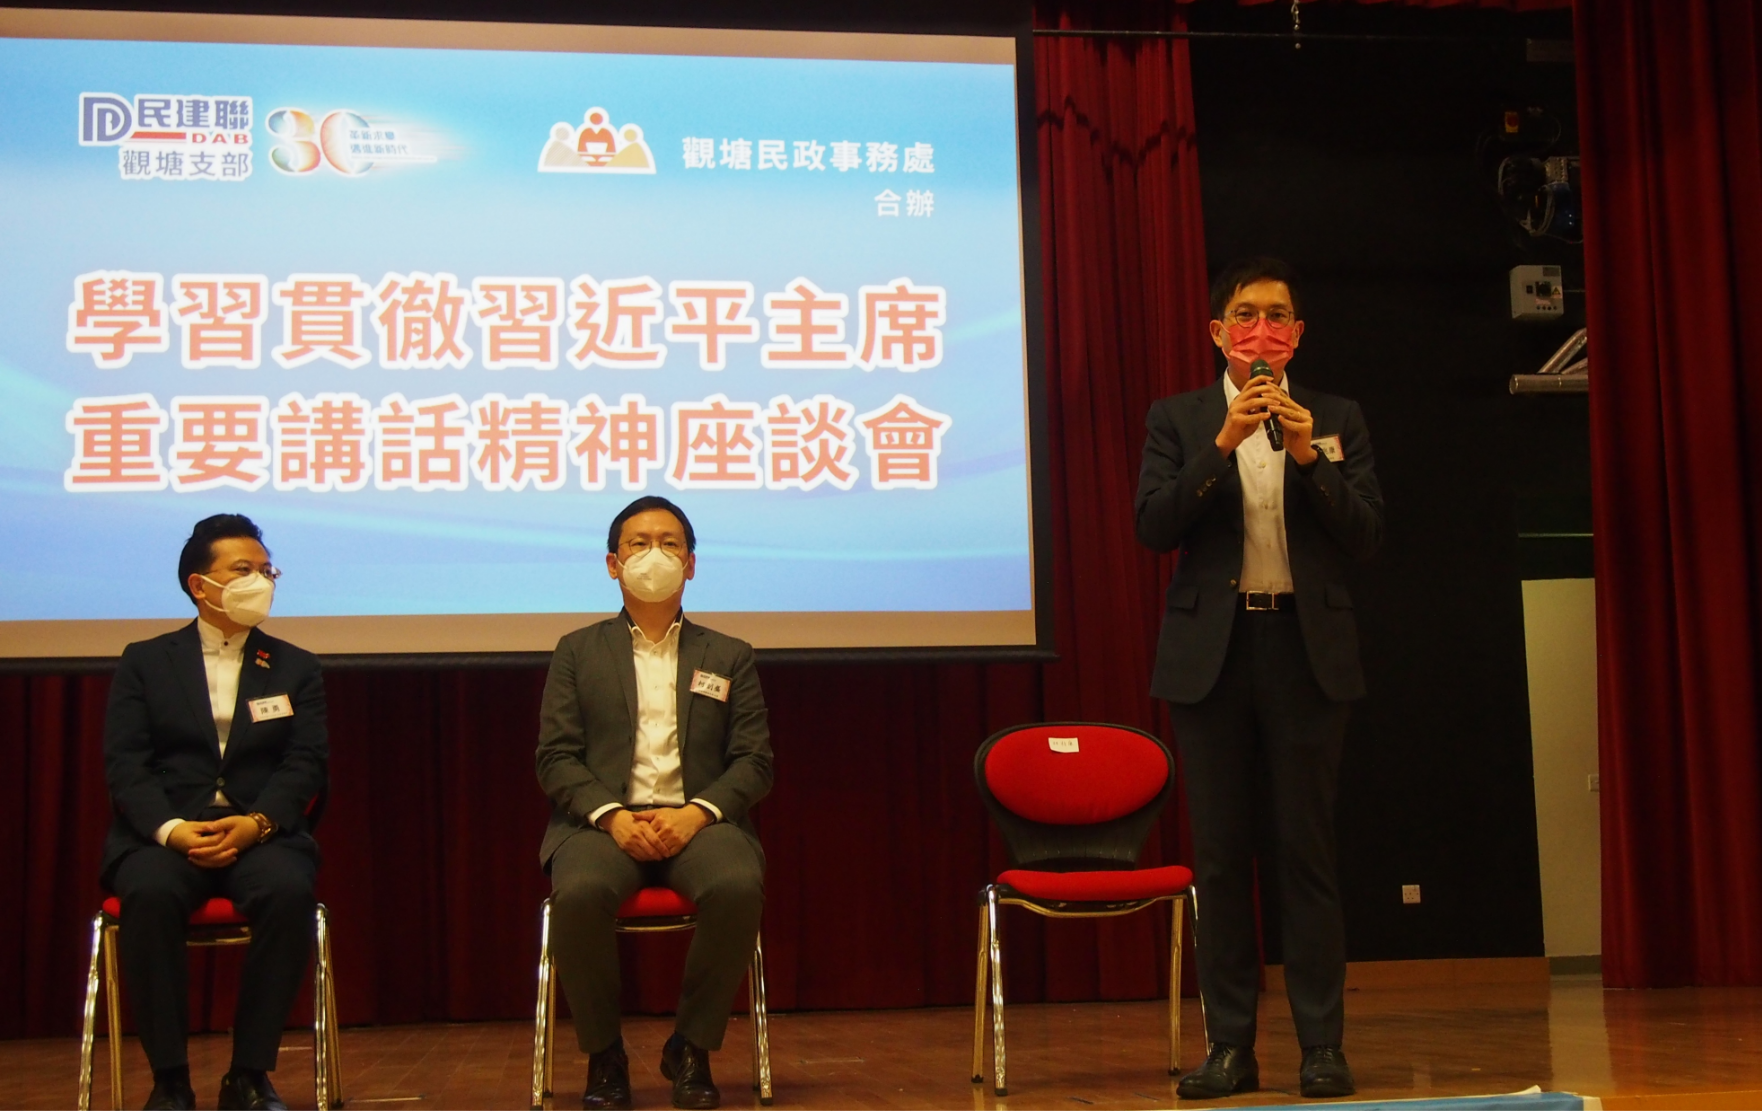 The Kwun Tong District Office and the Kwun Tong Branch of the Democratic Alliance for the Betterment and Progress of Hong Kong jointly held a session at Sau Mau Ping Community Hall yesterday (July 10) to learn about, promote and implement the spirit of President Xi Jinping's important speech. Photo shows the District Officer (Kwun Tong), Mr Andy Lam (first right), delivering a speech at the session.